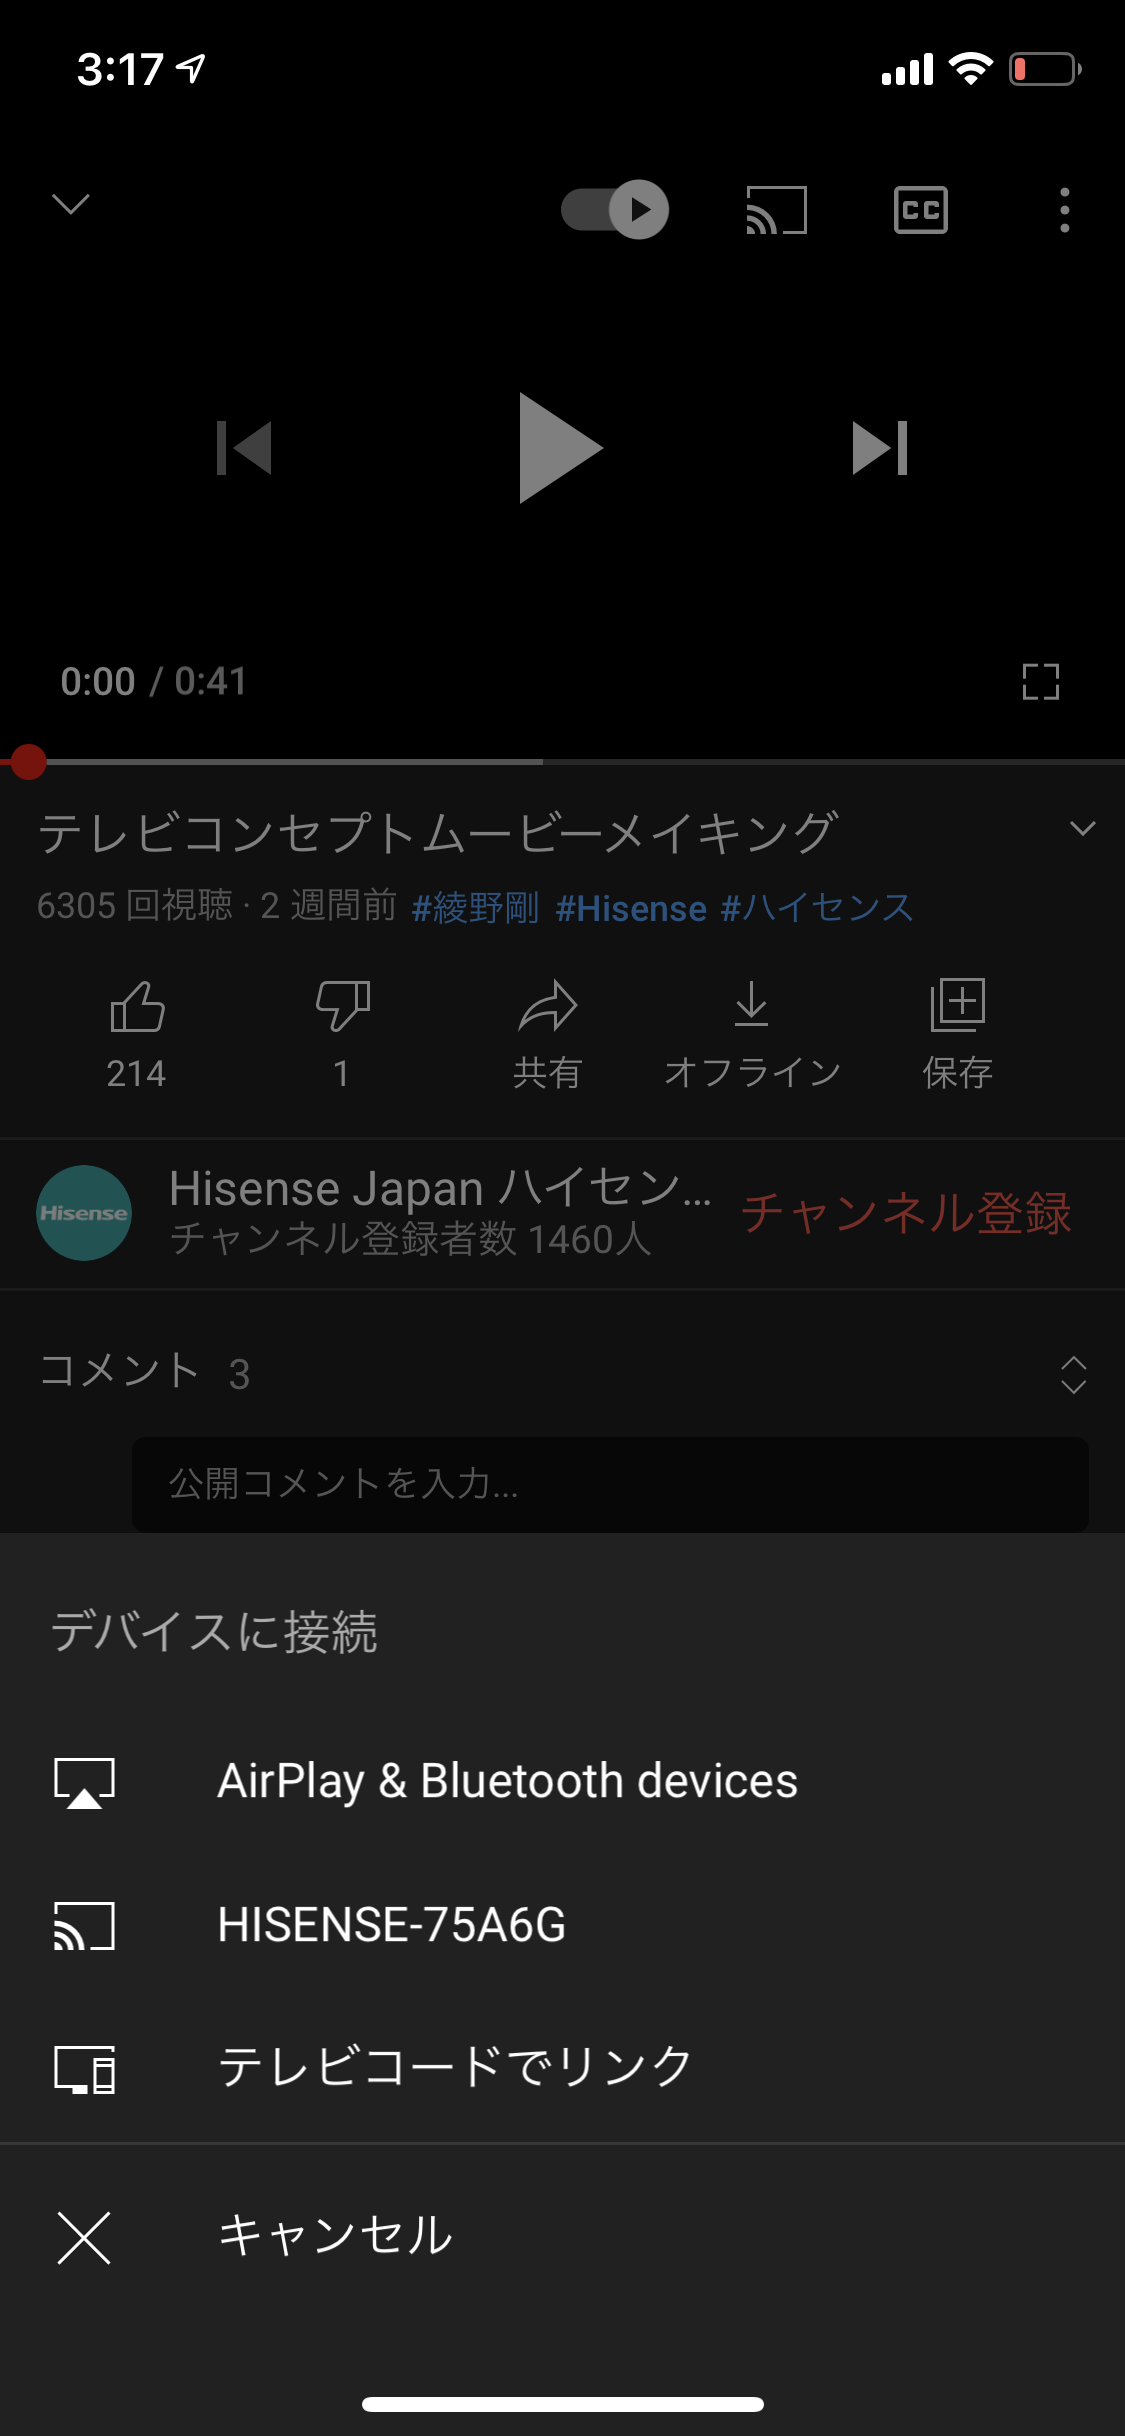 YouTube DIAL connection menu on iOS